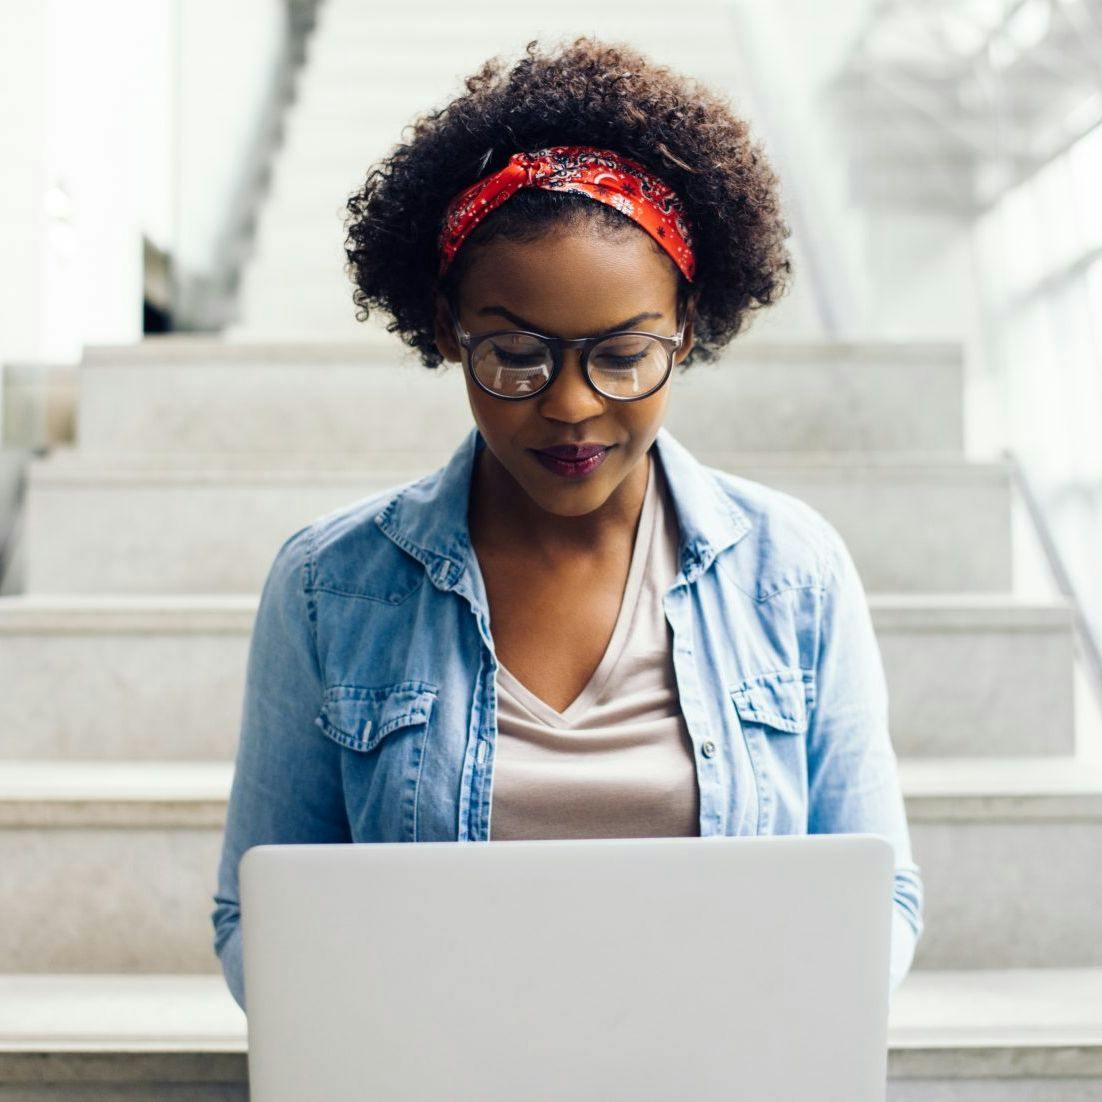 Free online courses that could work wonders for your career